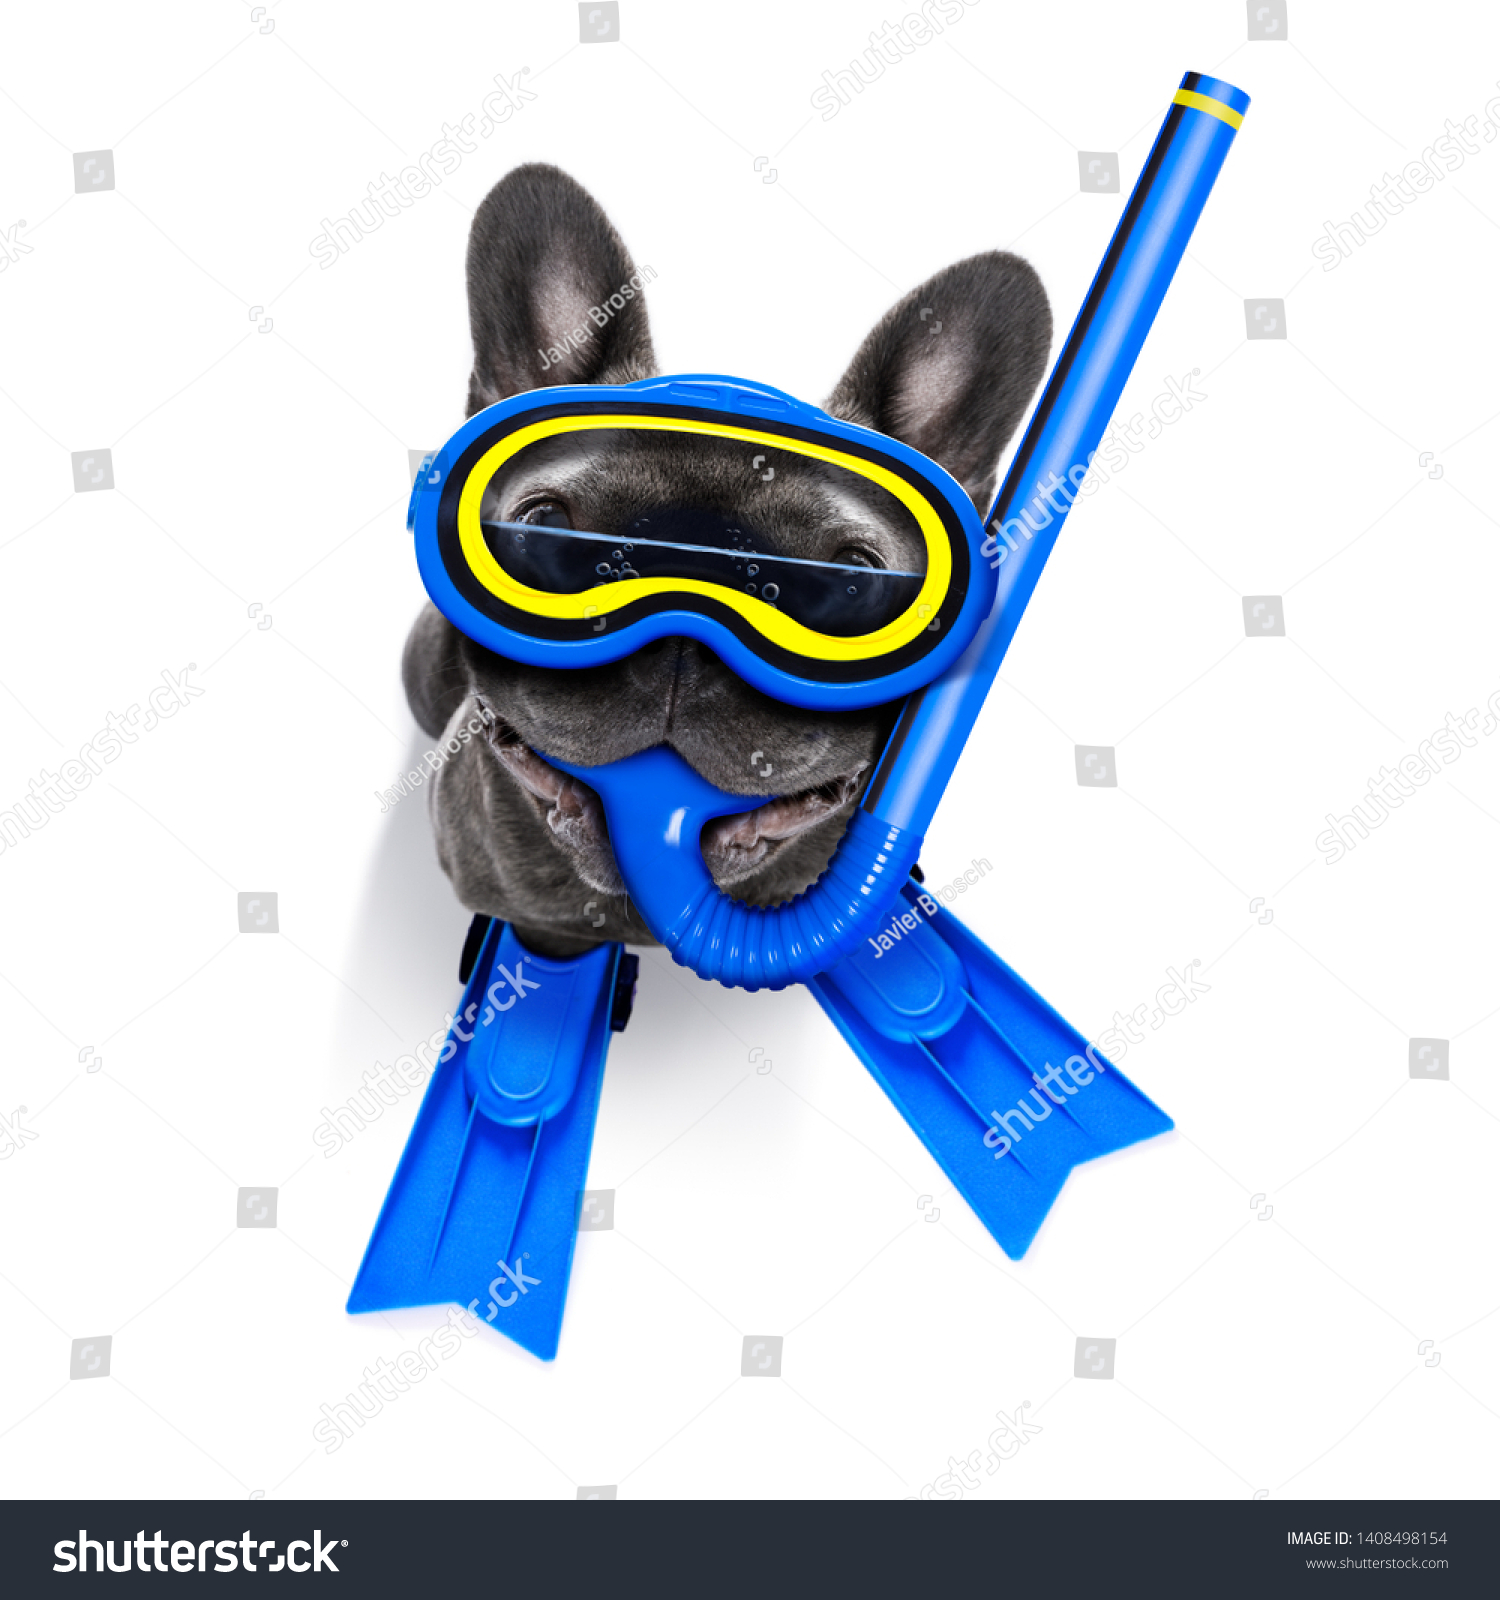 Snorkeling scuba diving french bulldog dog  with mask and fins ,  isolated on white background #1408498154